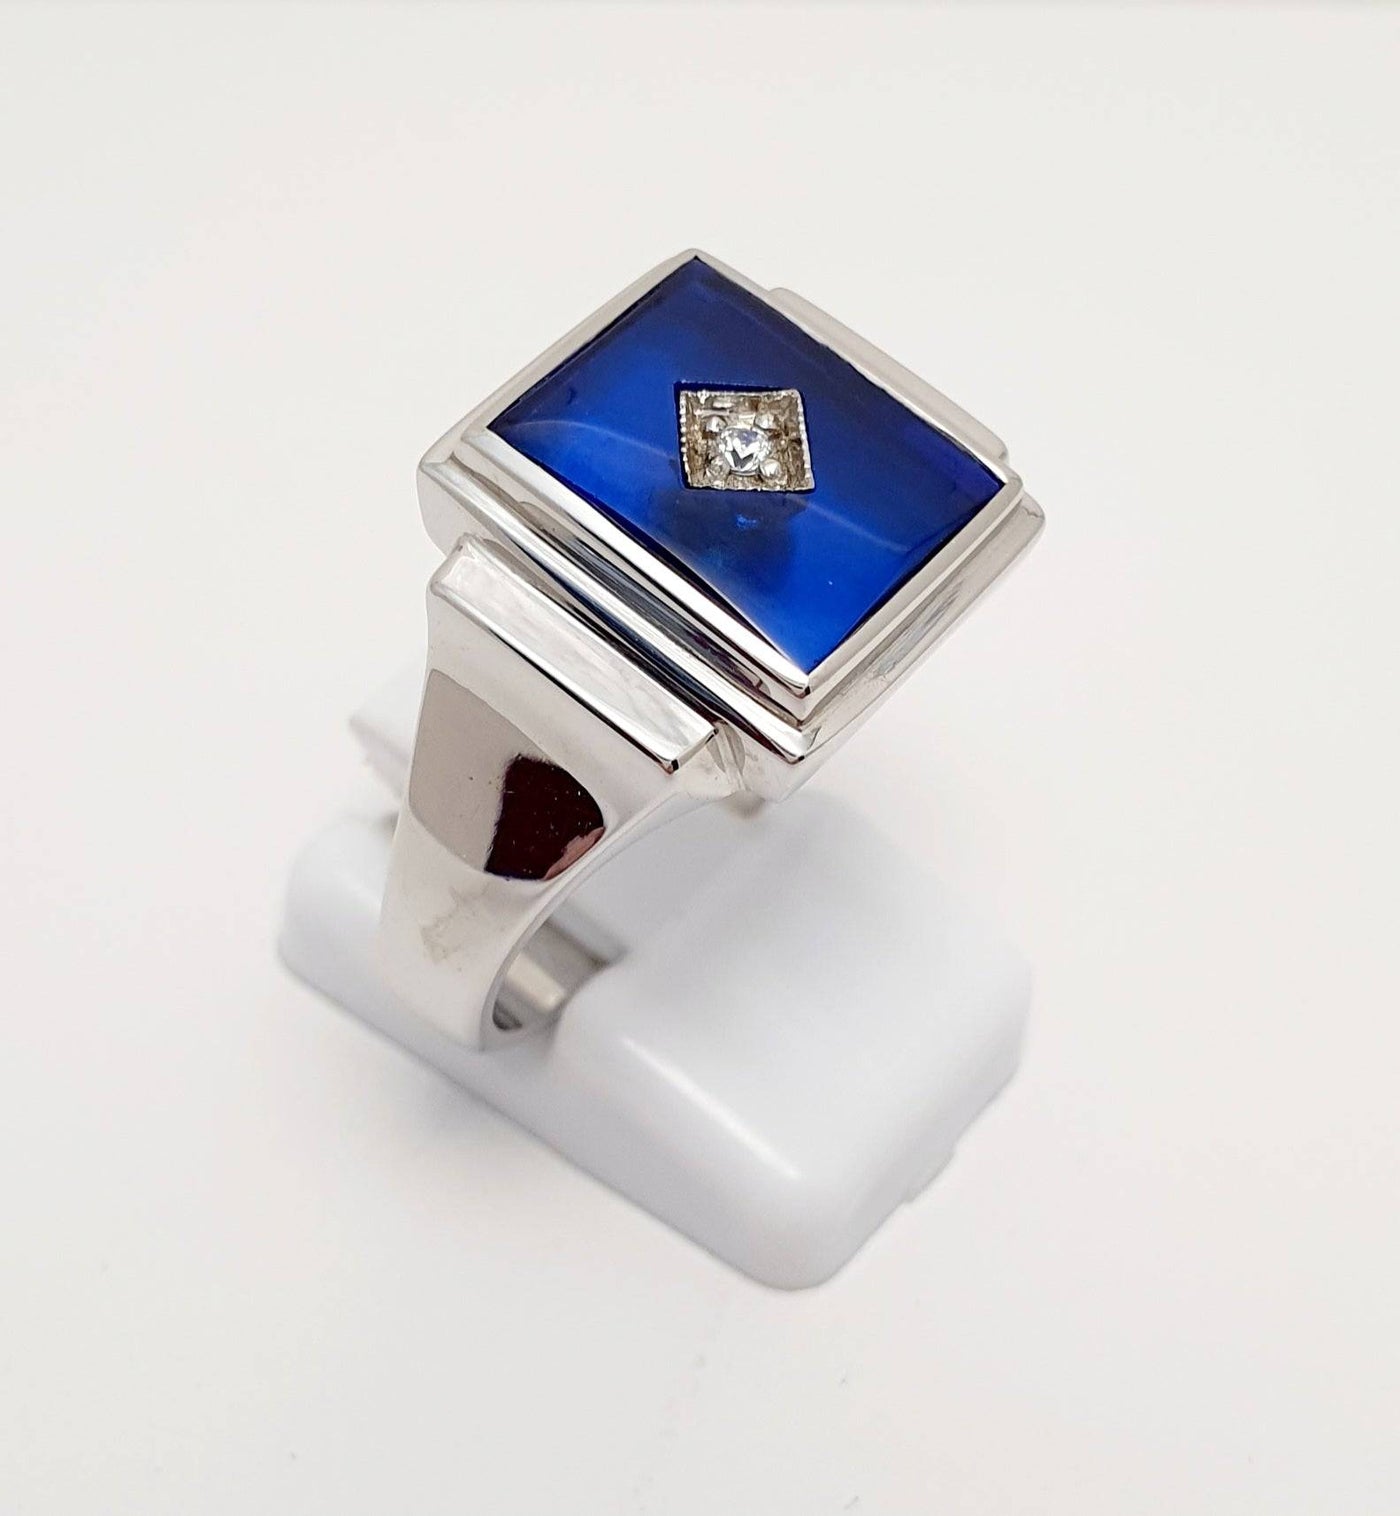 Sterling Silver Gents Ring With Created Sapphire And Cubic Zirconia. Rhodium Finish